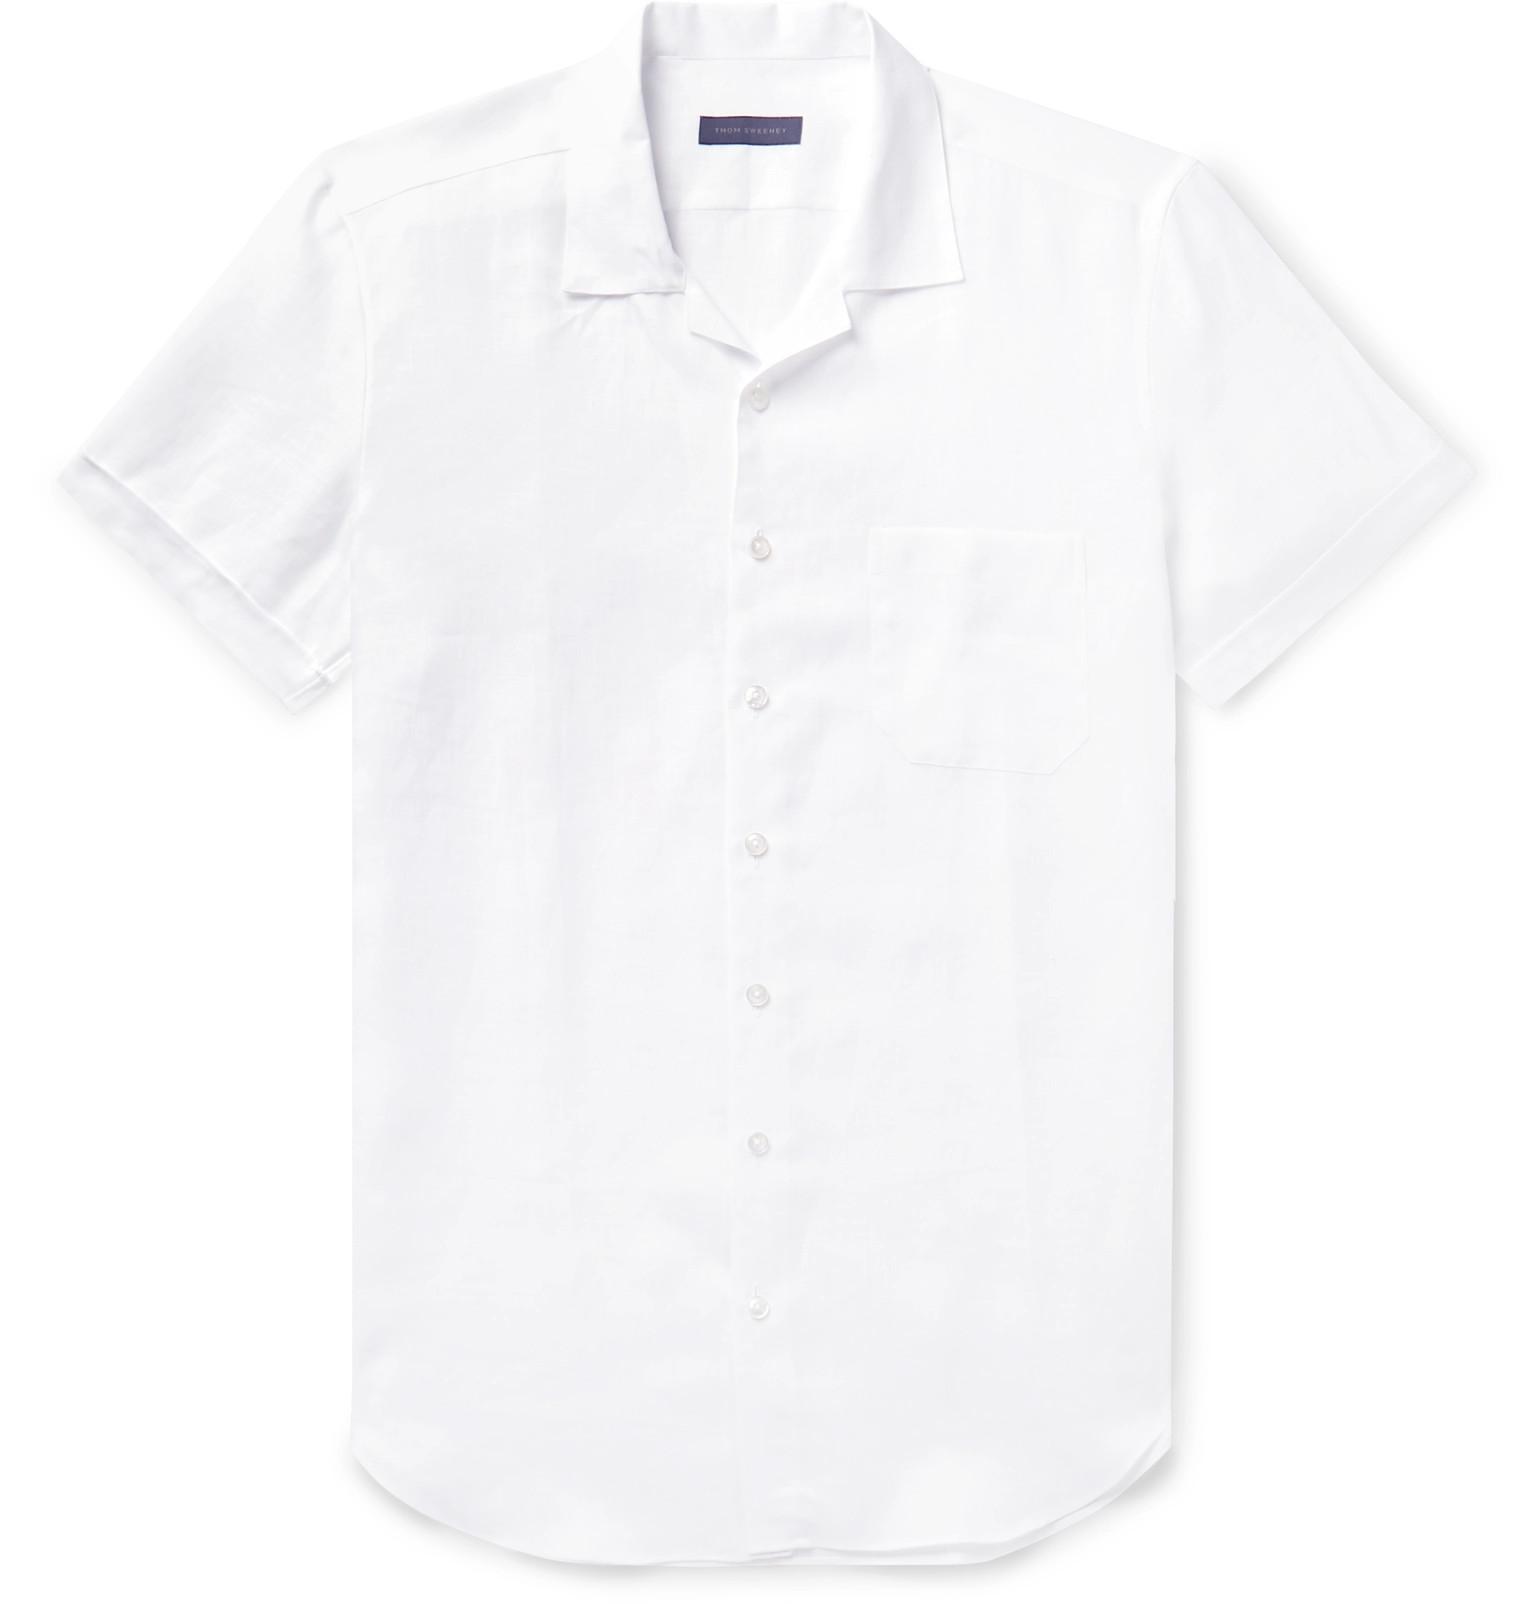 Thom Sweeney Slim-fit Camp-collar Linen Shirt in White for Men - Lyst